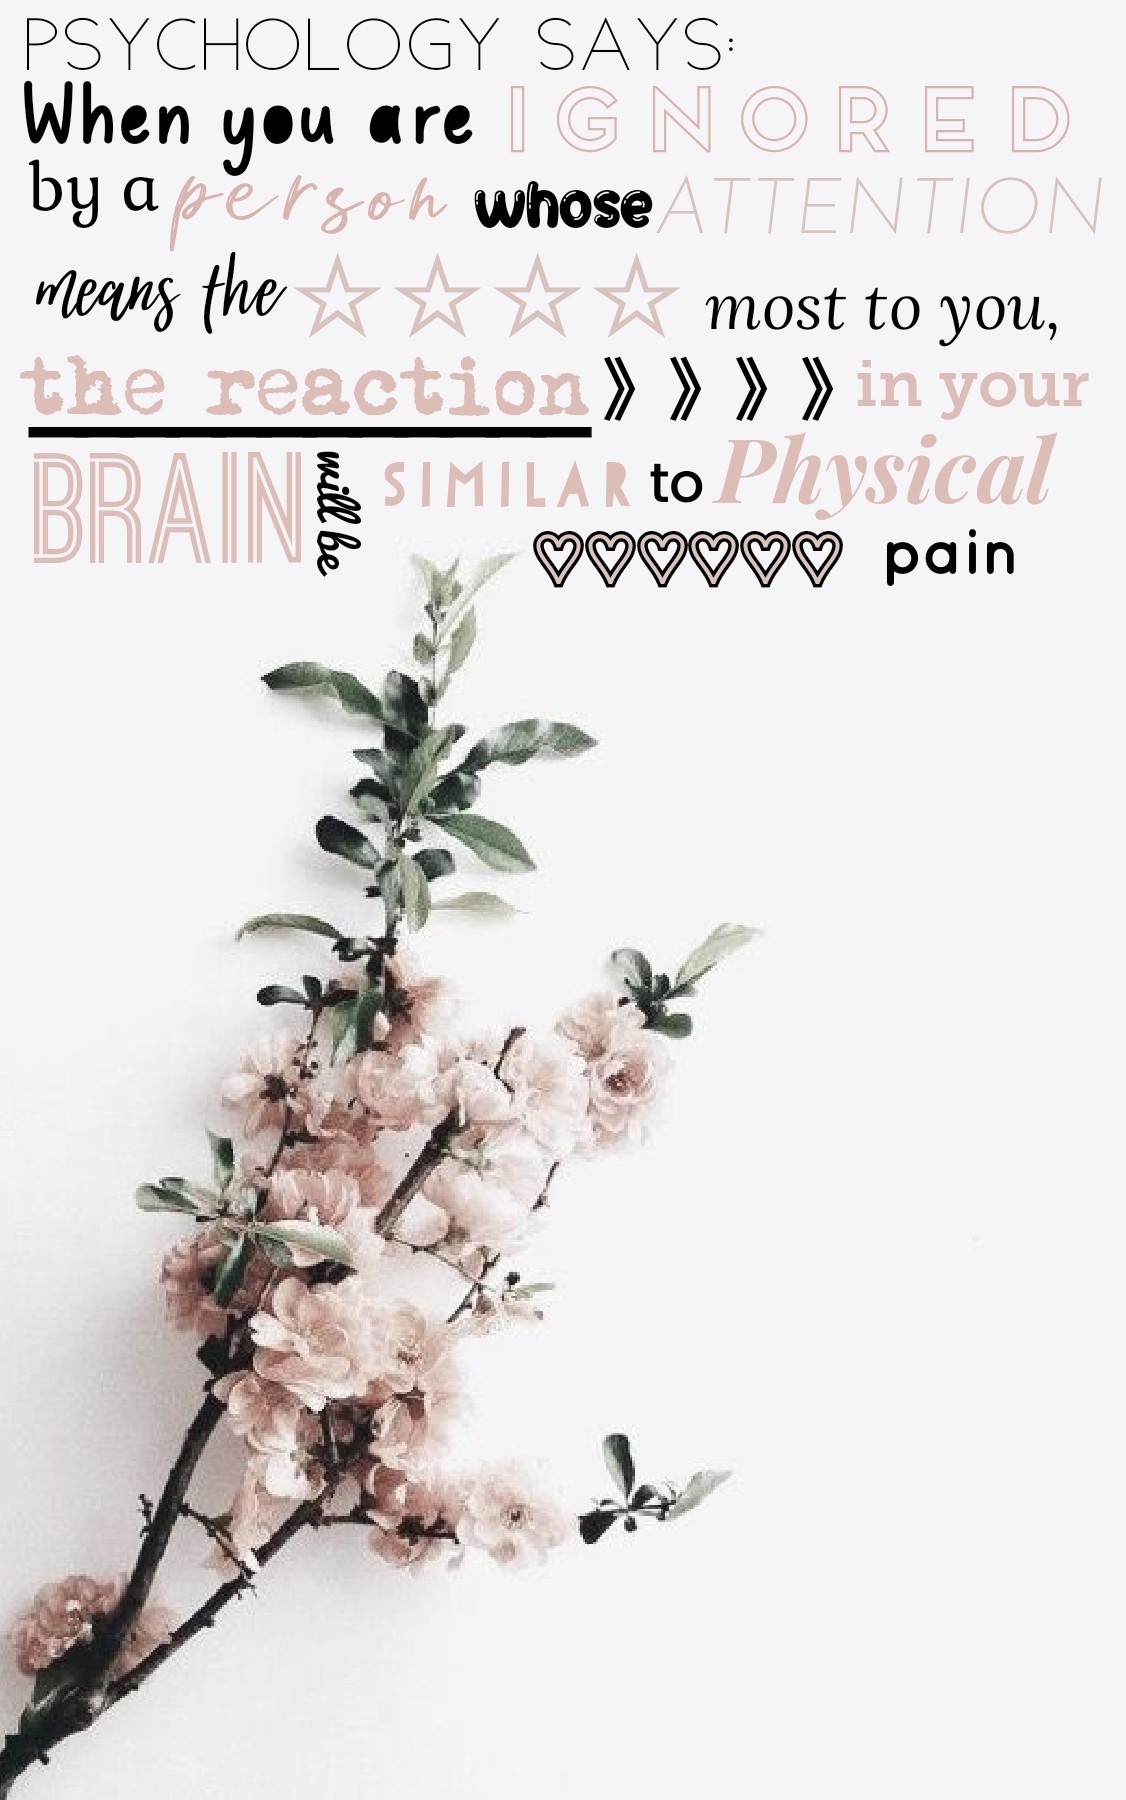 🌸tap🌸
Don't mind me, I'm just a little obsessed....😍
QOTD: Do you want more psychology quotes???
Plz lmk in remixes!!!
☆Minimilist Aesthetic☆